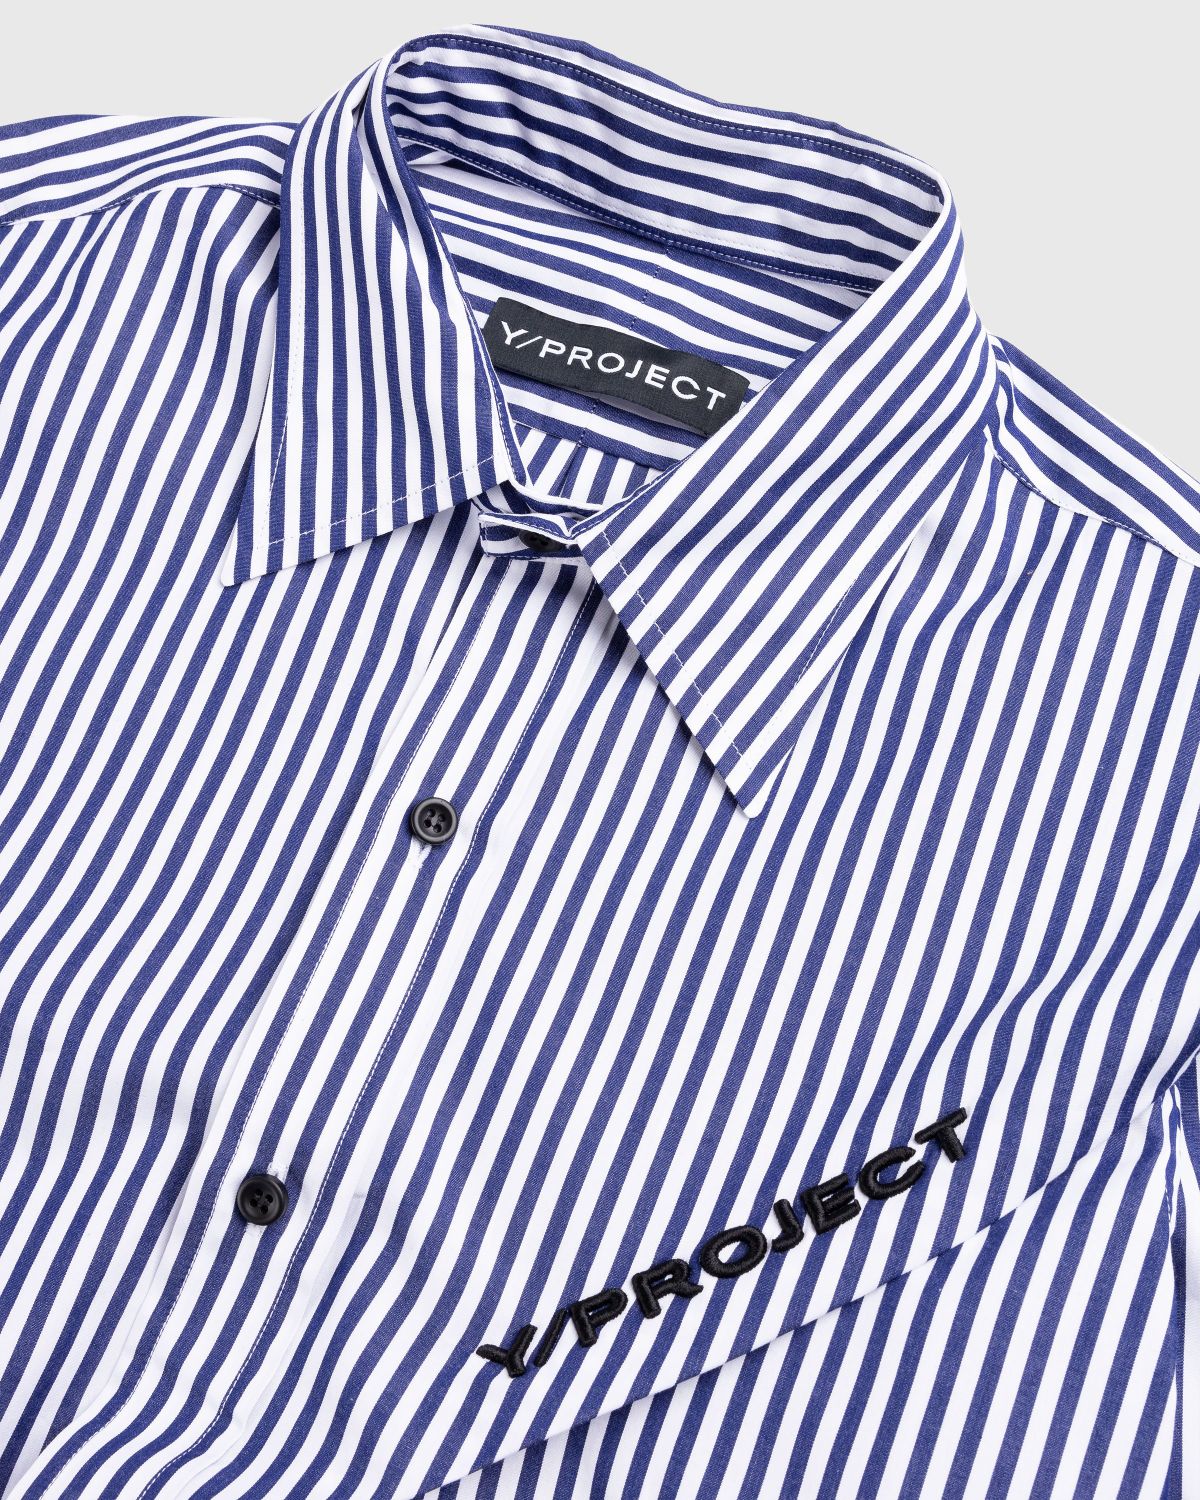 Y/Project – Pinched Logo Stripe Shirt Navy/White - Shirts - Blue - Image 5